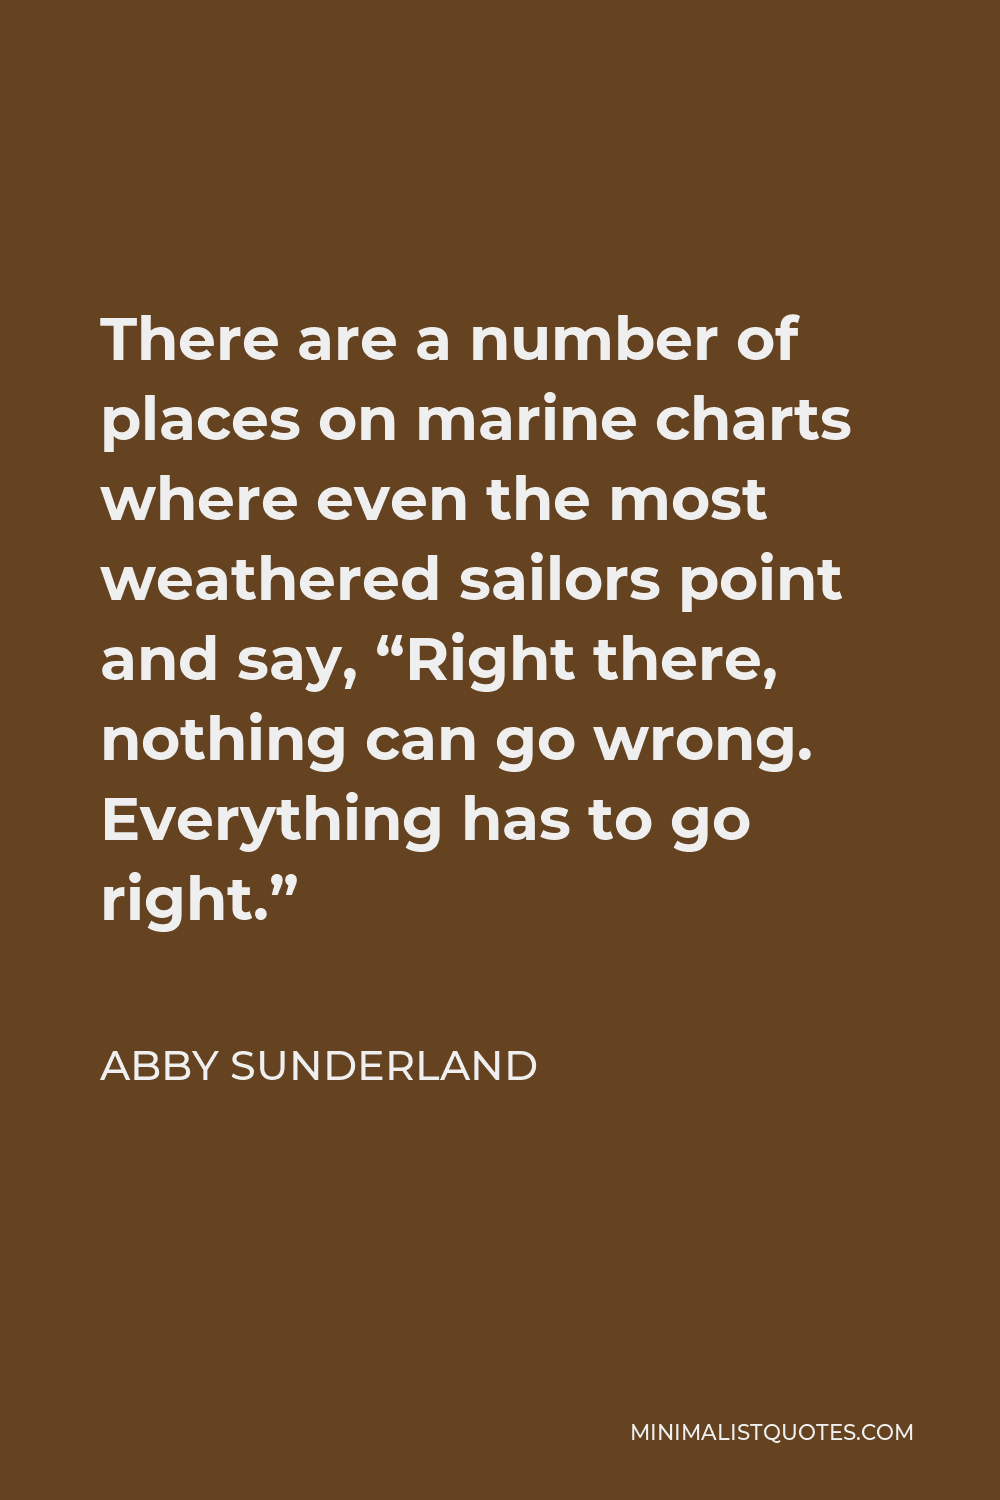 Abby Sunderland Quote - There are a number of places on marine charts where even the most weathered sailors point and say, “Right there, nothing can go wrong. Everything has to go right.”